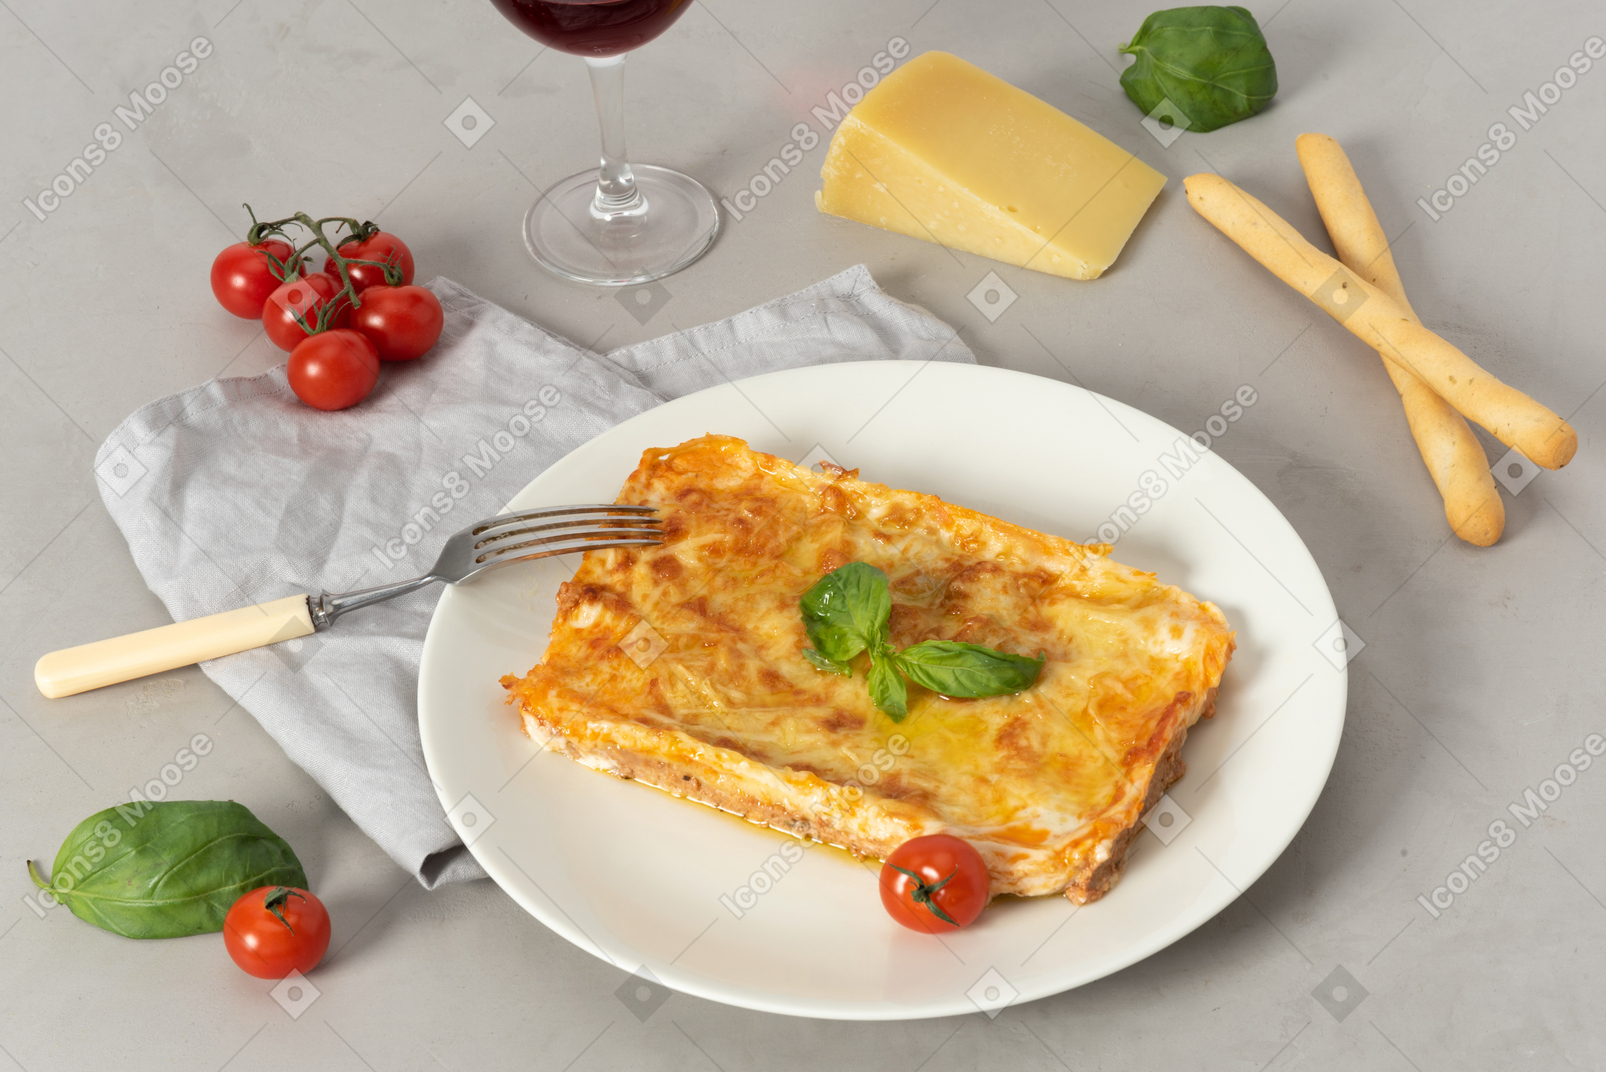 Lasagna on the plate, cherry tomatoes, piece of cheese and grissini